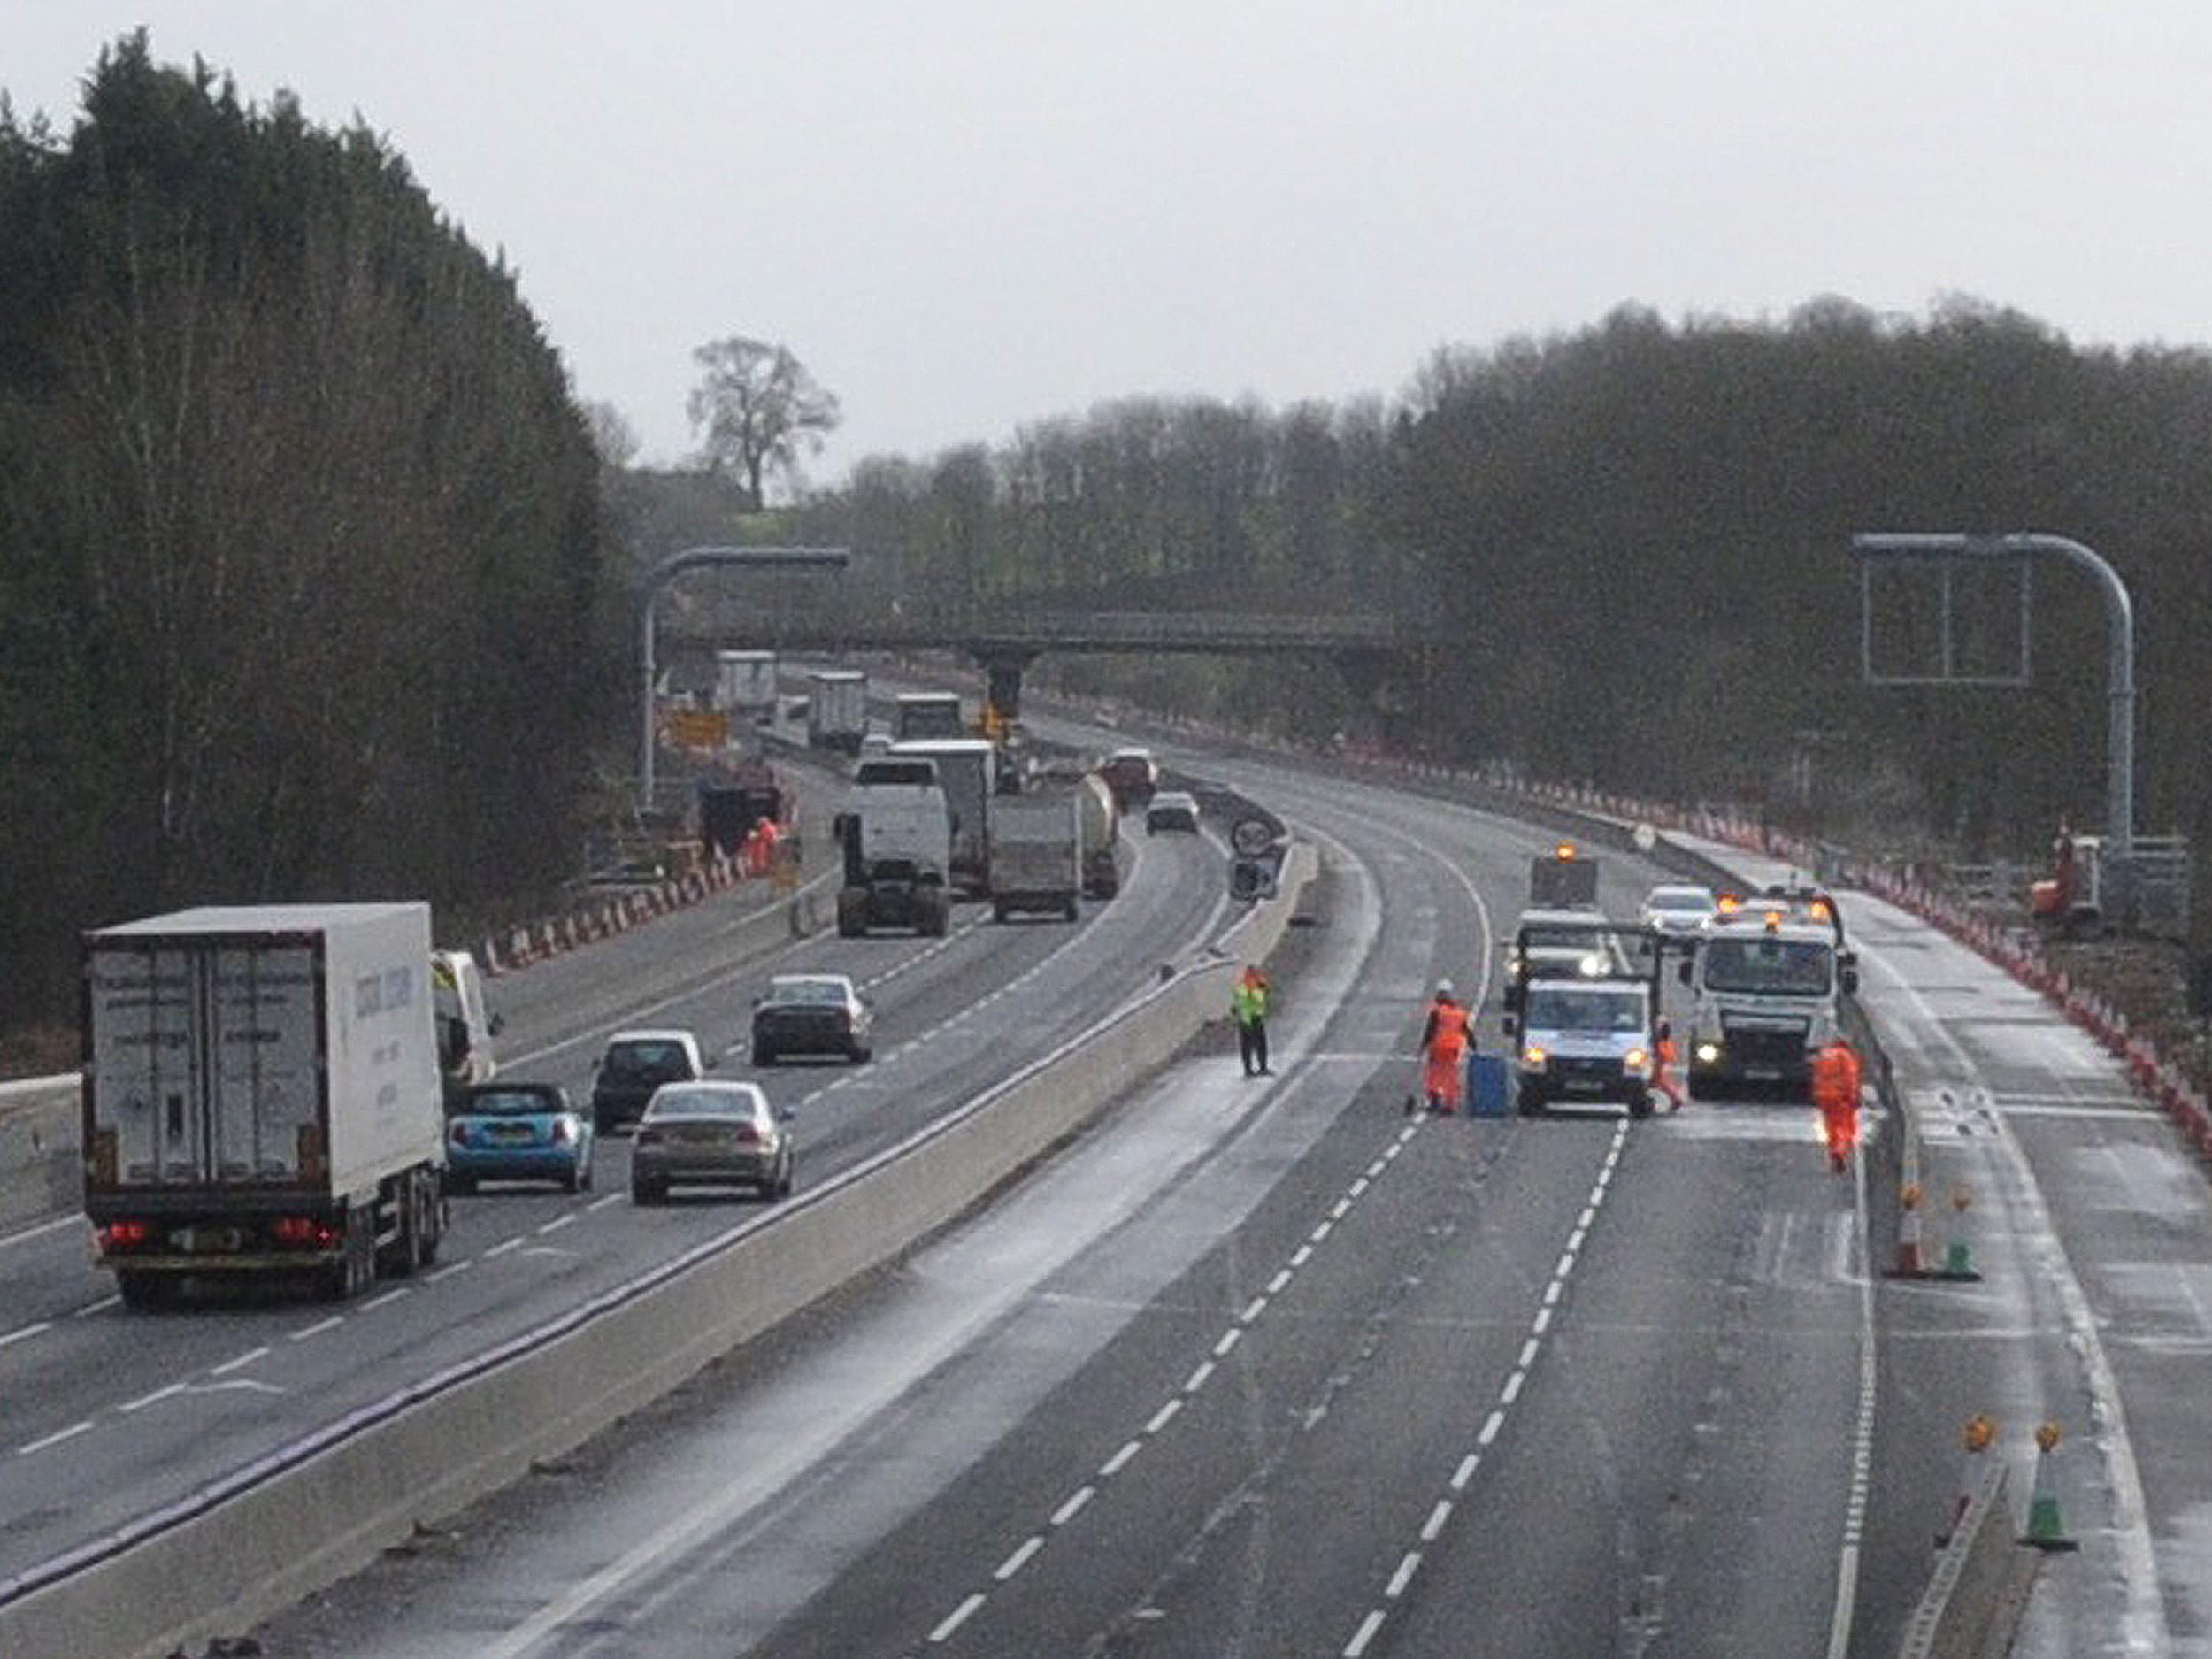 The scene on the M1 near Daventry where a body was found in the early hours on the northbound carriageway